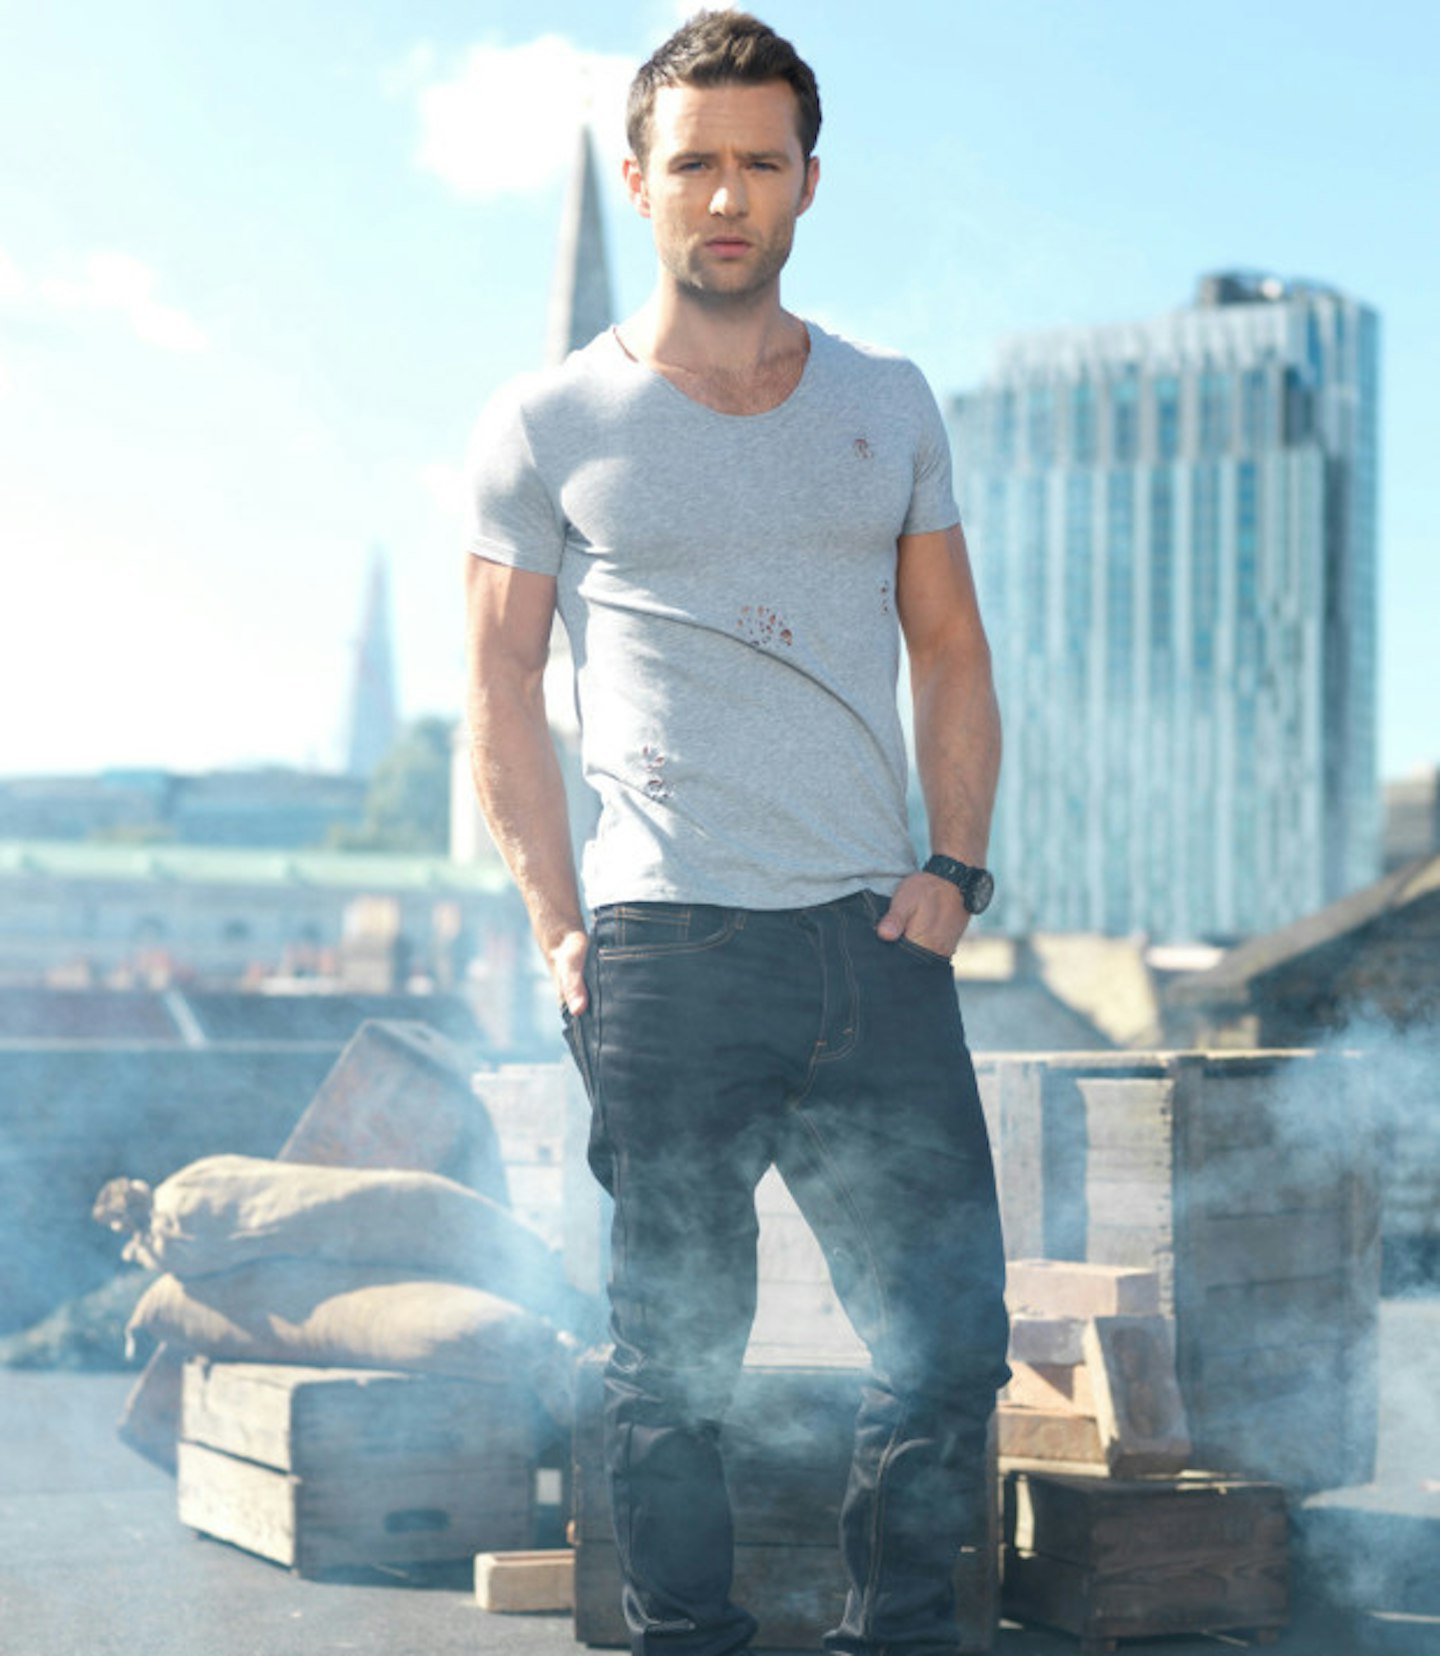 EMBARGOED UNTIL 07.10.15 00.01 Harry Judd teams up with NOW to launch Obleshion, Eau De Walker fragrance ahead of Season 6 of The Walking Dead (9)